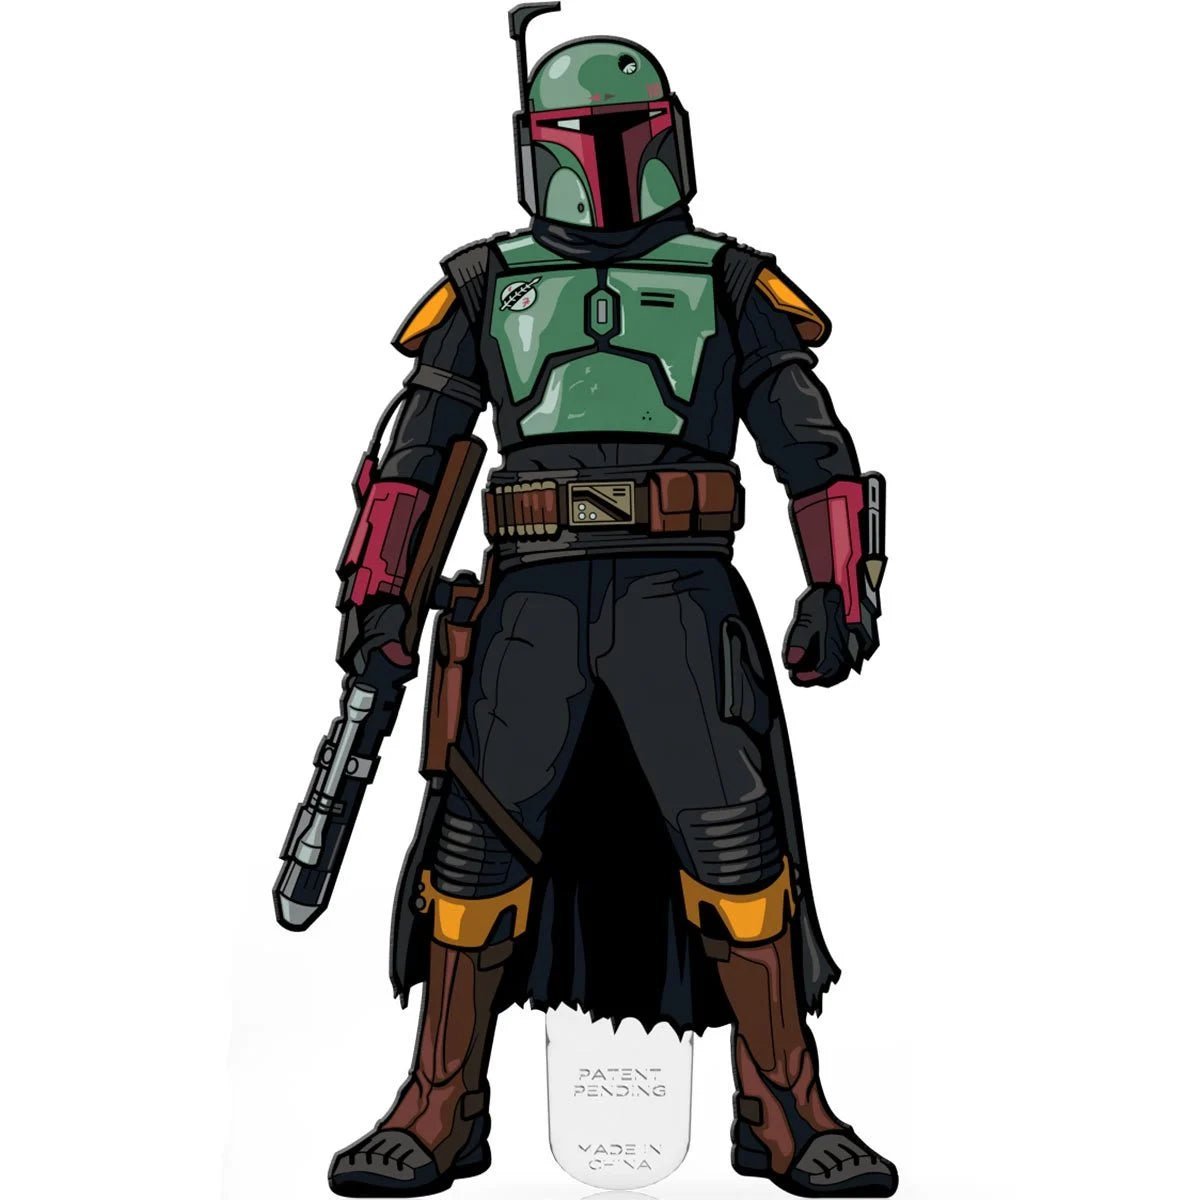 Star Wars: The Book of Boba Fett Boba Fett FiGPiN Classic Pin #859 by FiGPiN at Simon's Collectibles | Star Wars: The Book of Boba Fett Boba Fett FiGPiN Classic Pin #859: From Star Wars: The Book of Boba Fett comes this Boba Fett 3-inch FiGPiN Classic Ena